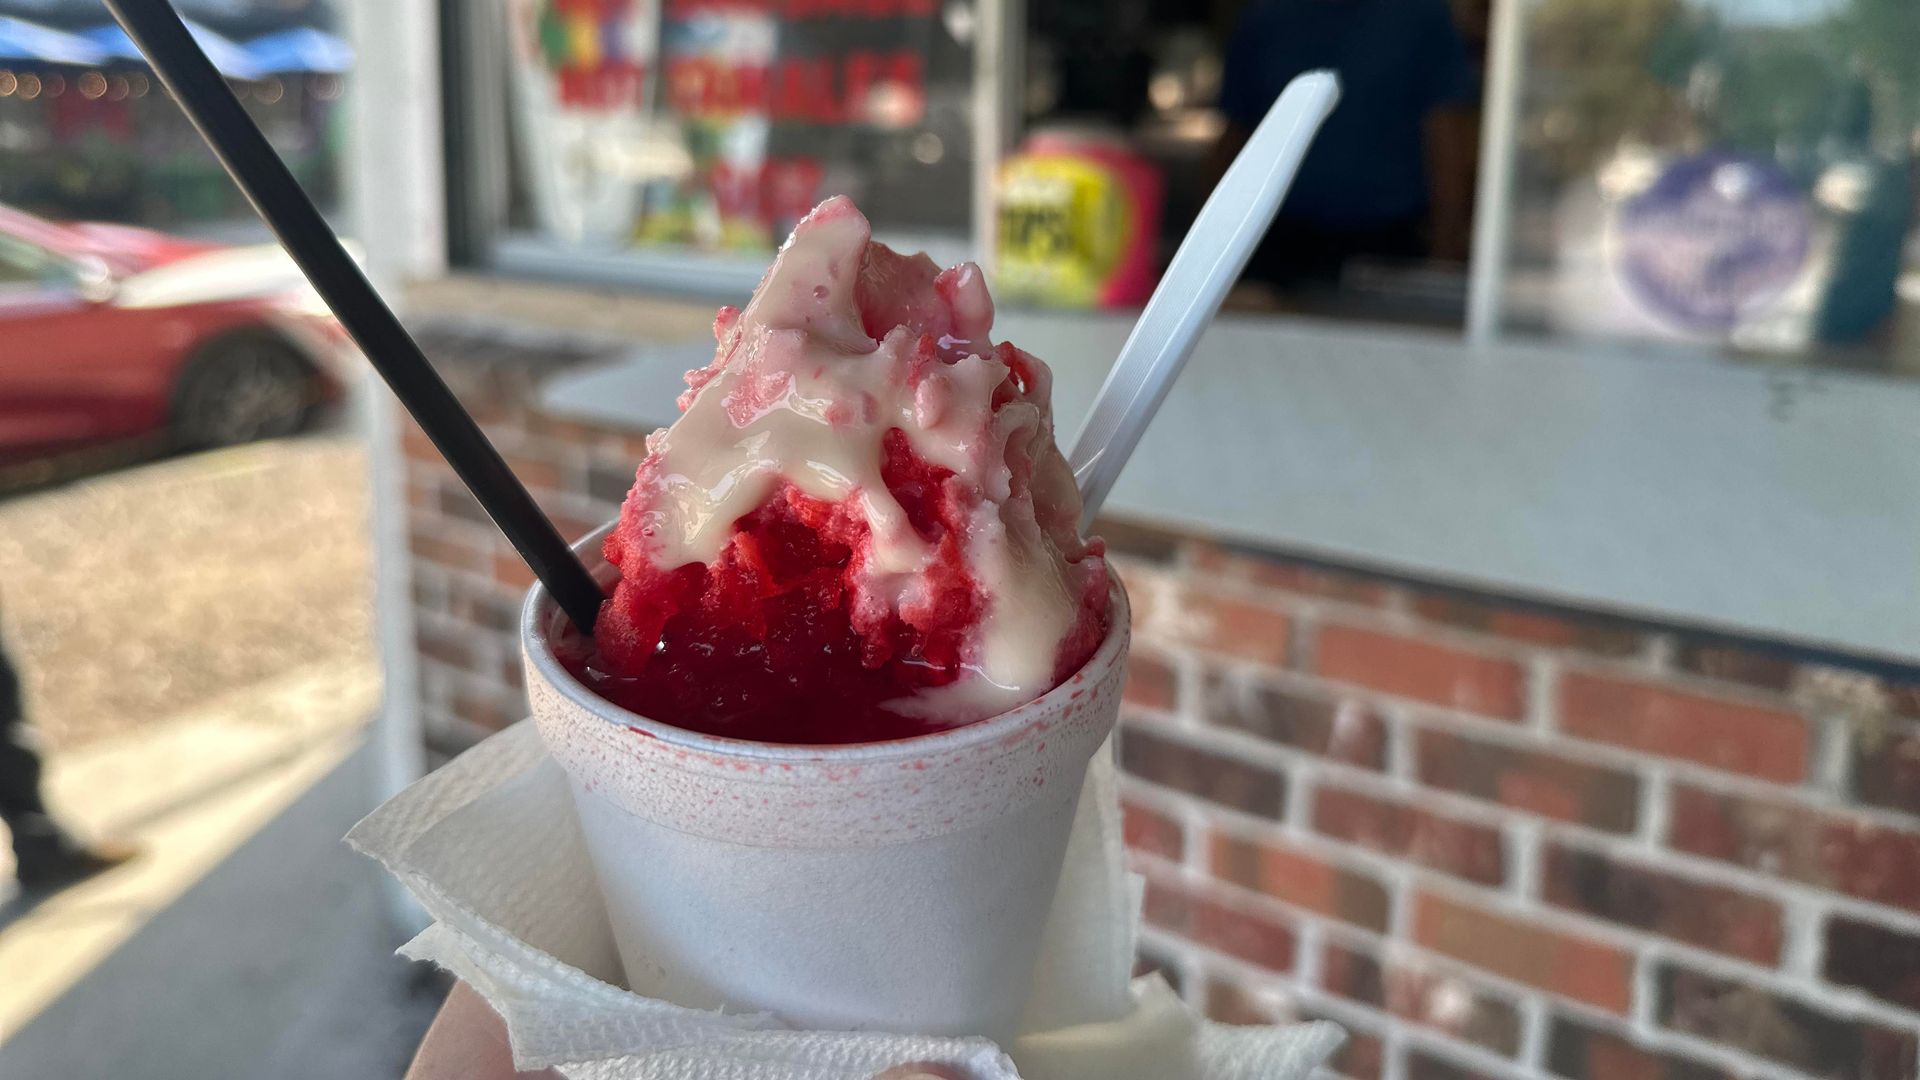 Photo shows a red strawberry snoball in a white styrofoam cup